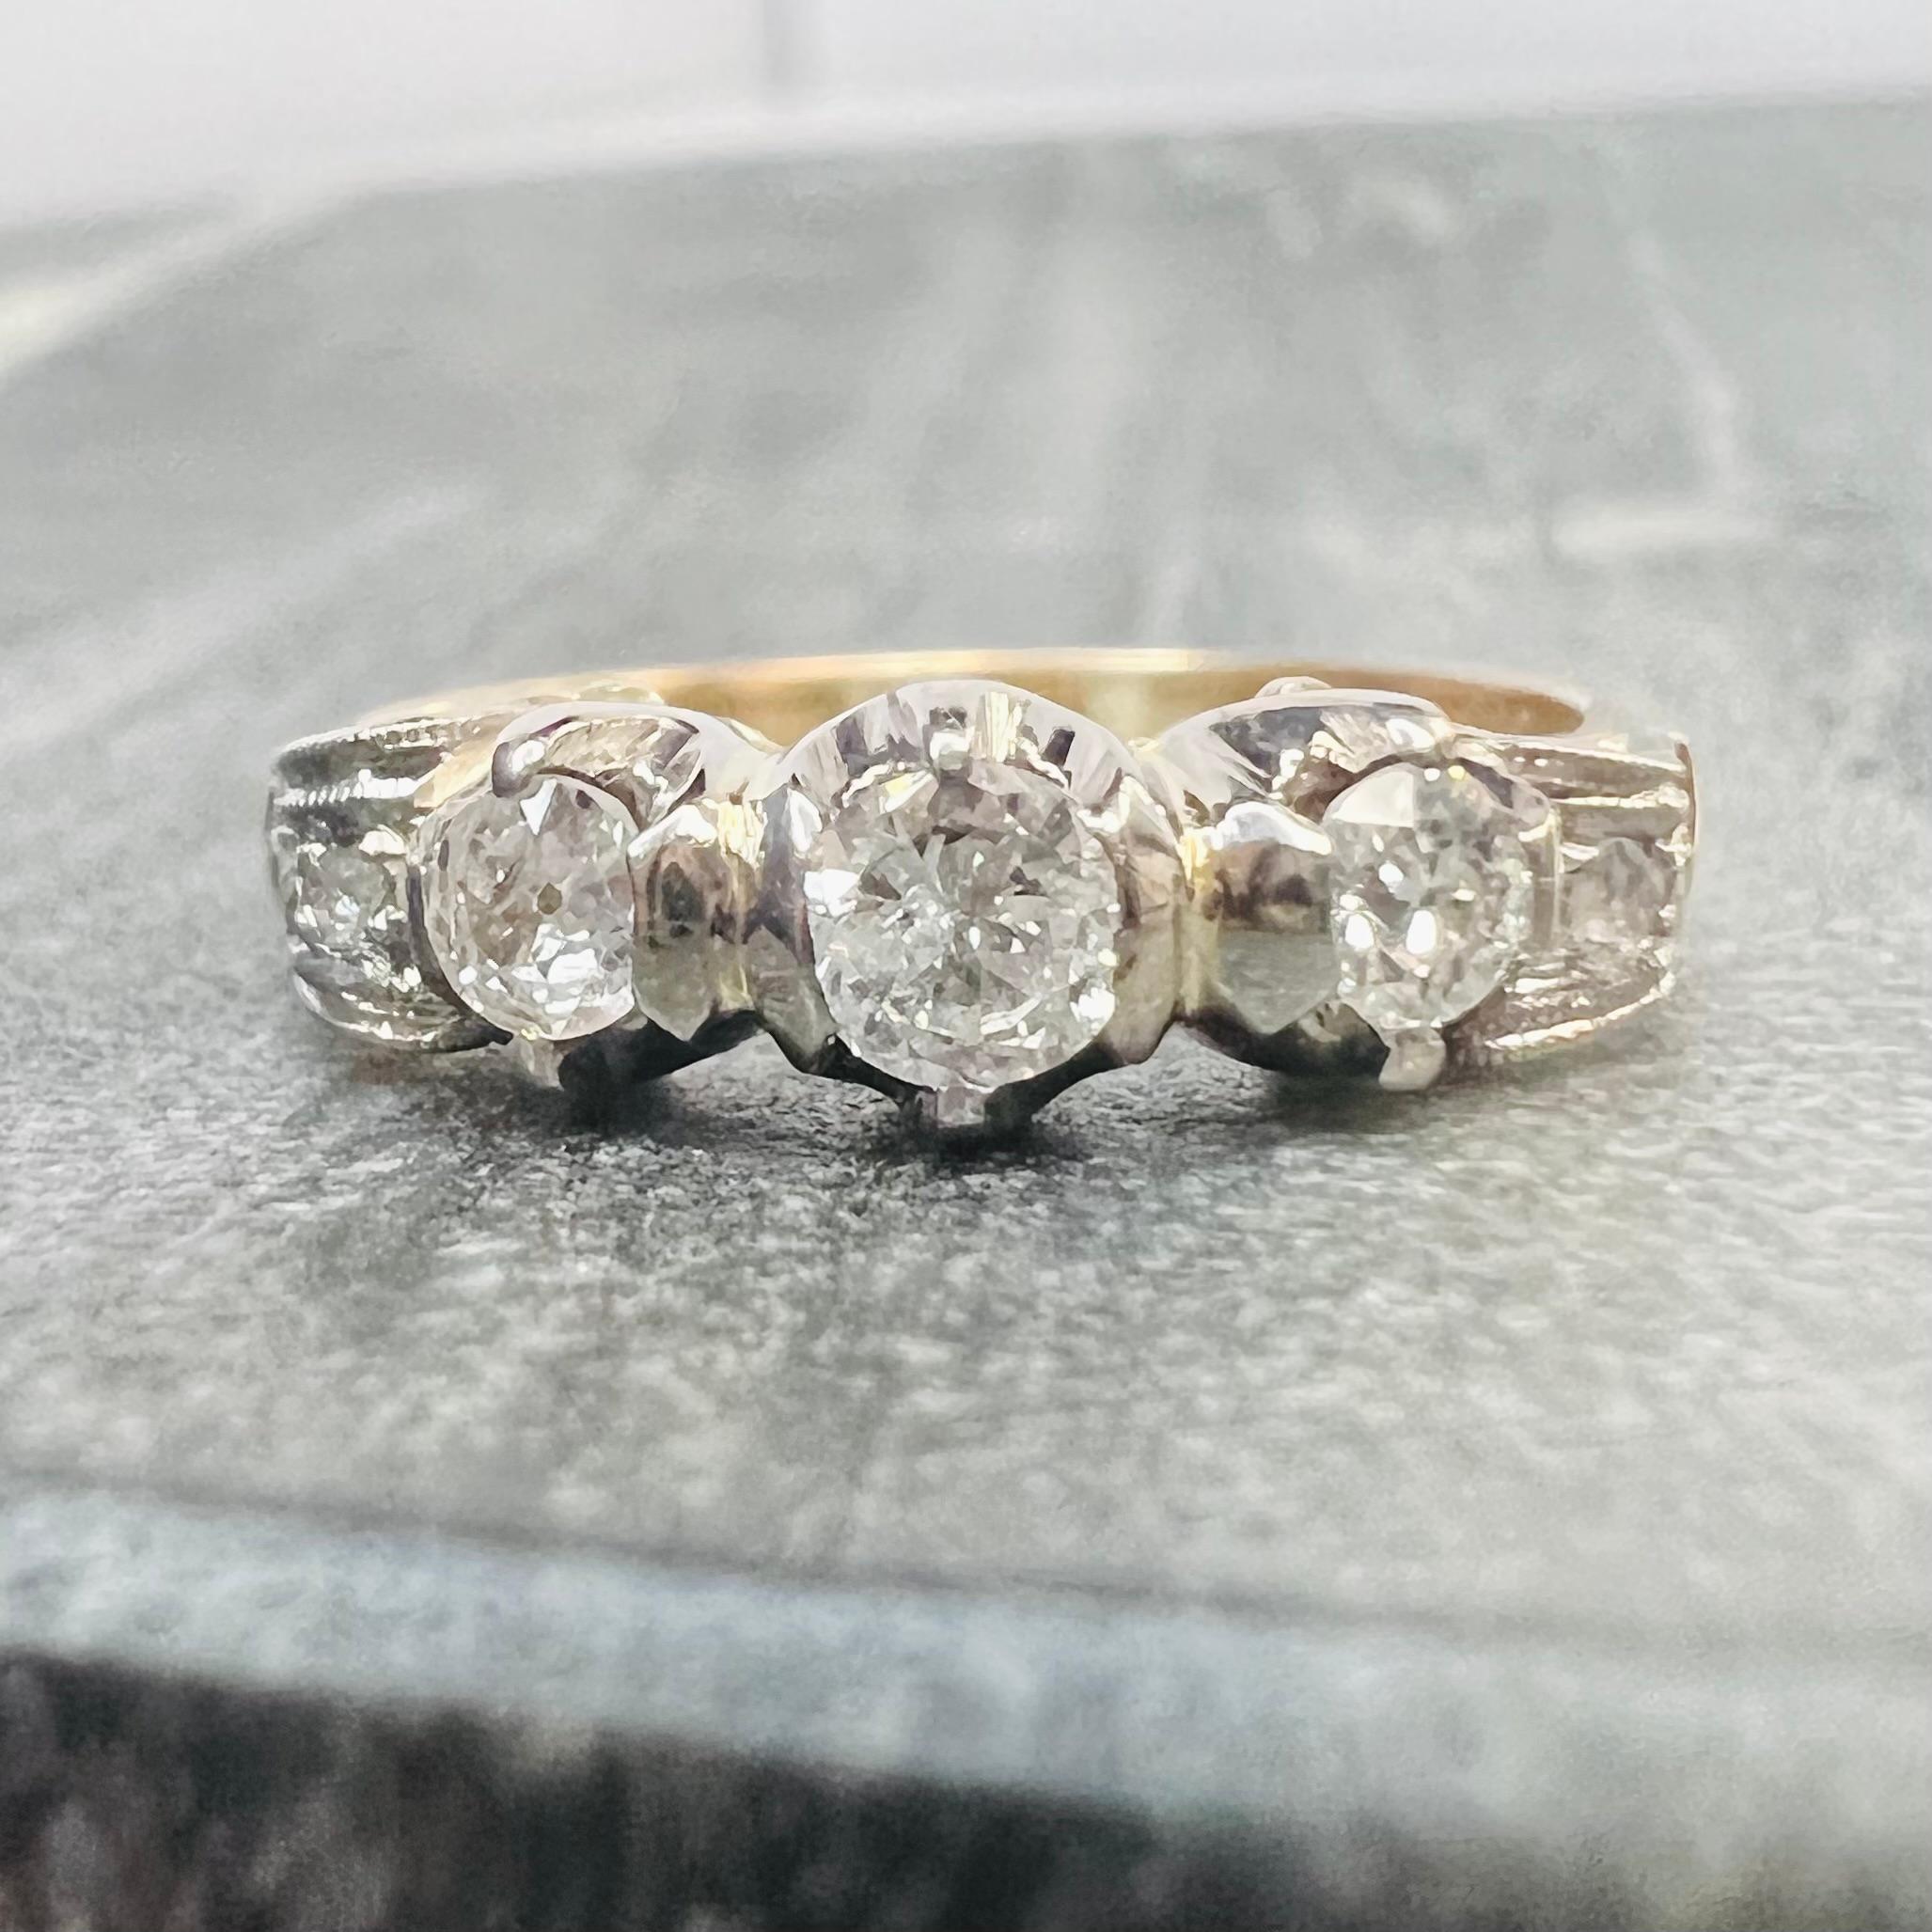 Presenting a,

Gorgeous Vintage Edwardian Ring with 3 Prong set diamonds.

The Ring band is engraved with design with diamonds on Platinum.

The Ring band is made in 18K Yellow Gold 

The Diamonds are natural, earth mined.

The diamonds are